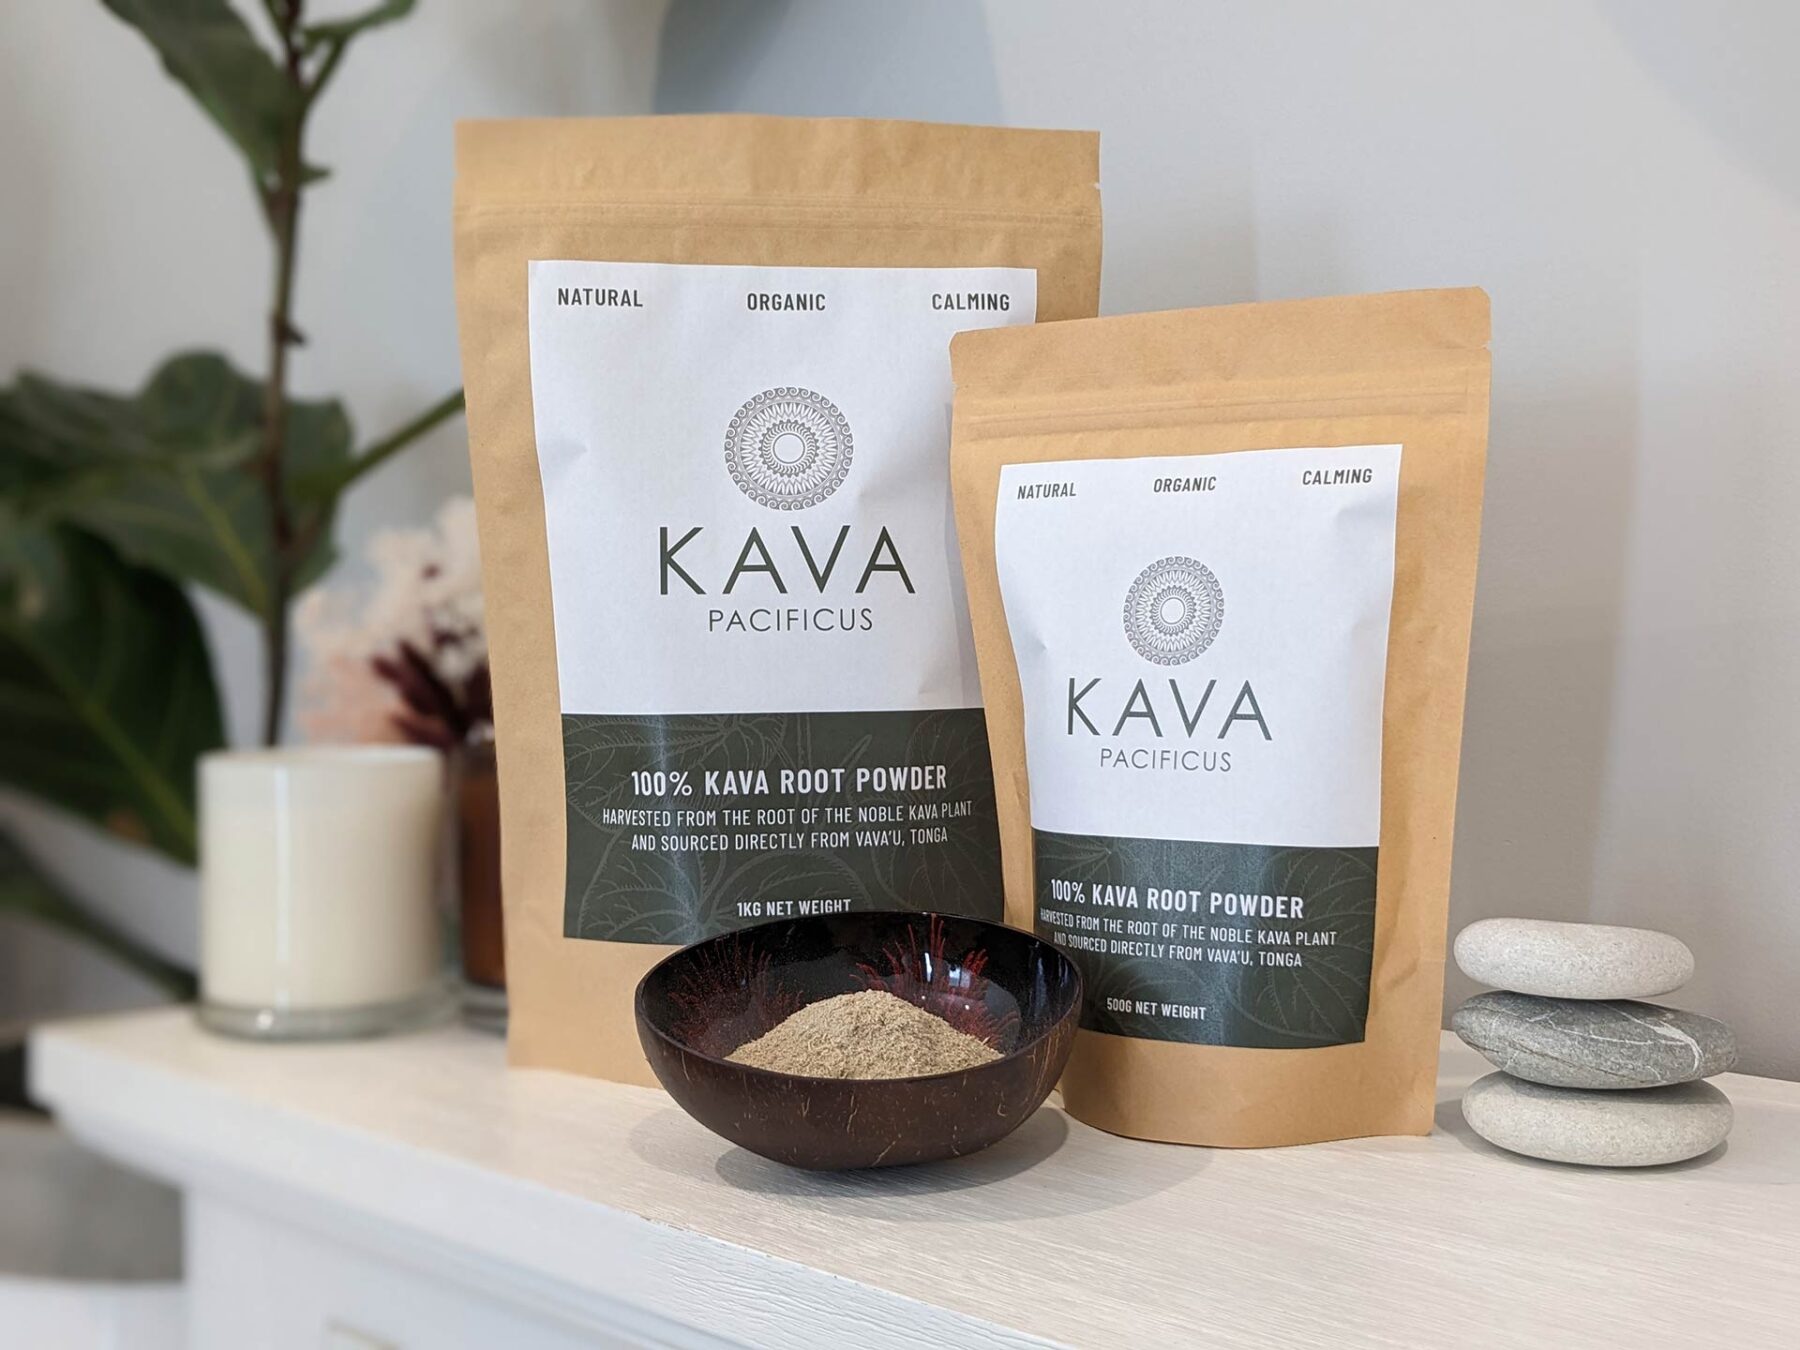 Kava Pacificus 100% Kava Root Powder Bags with Kava Bowl